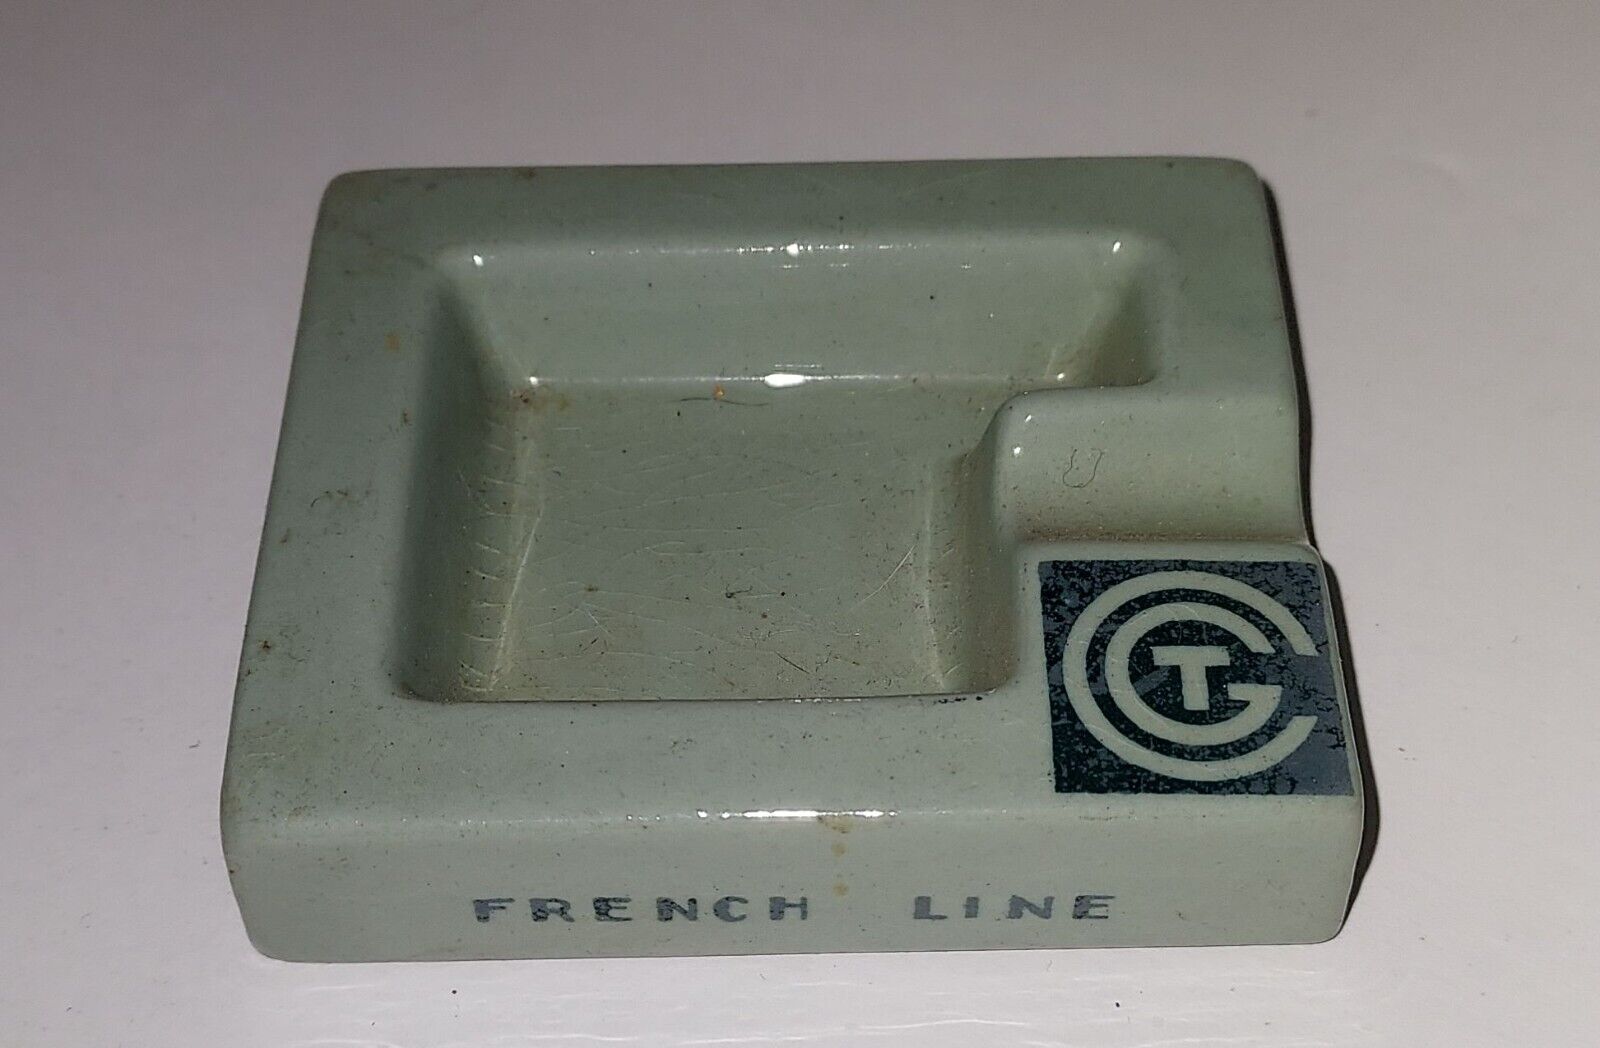 Vintage Art Deco Green Jean Luce French Line SS Normandie Ashtray